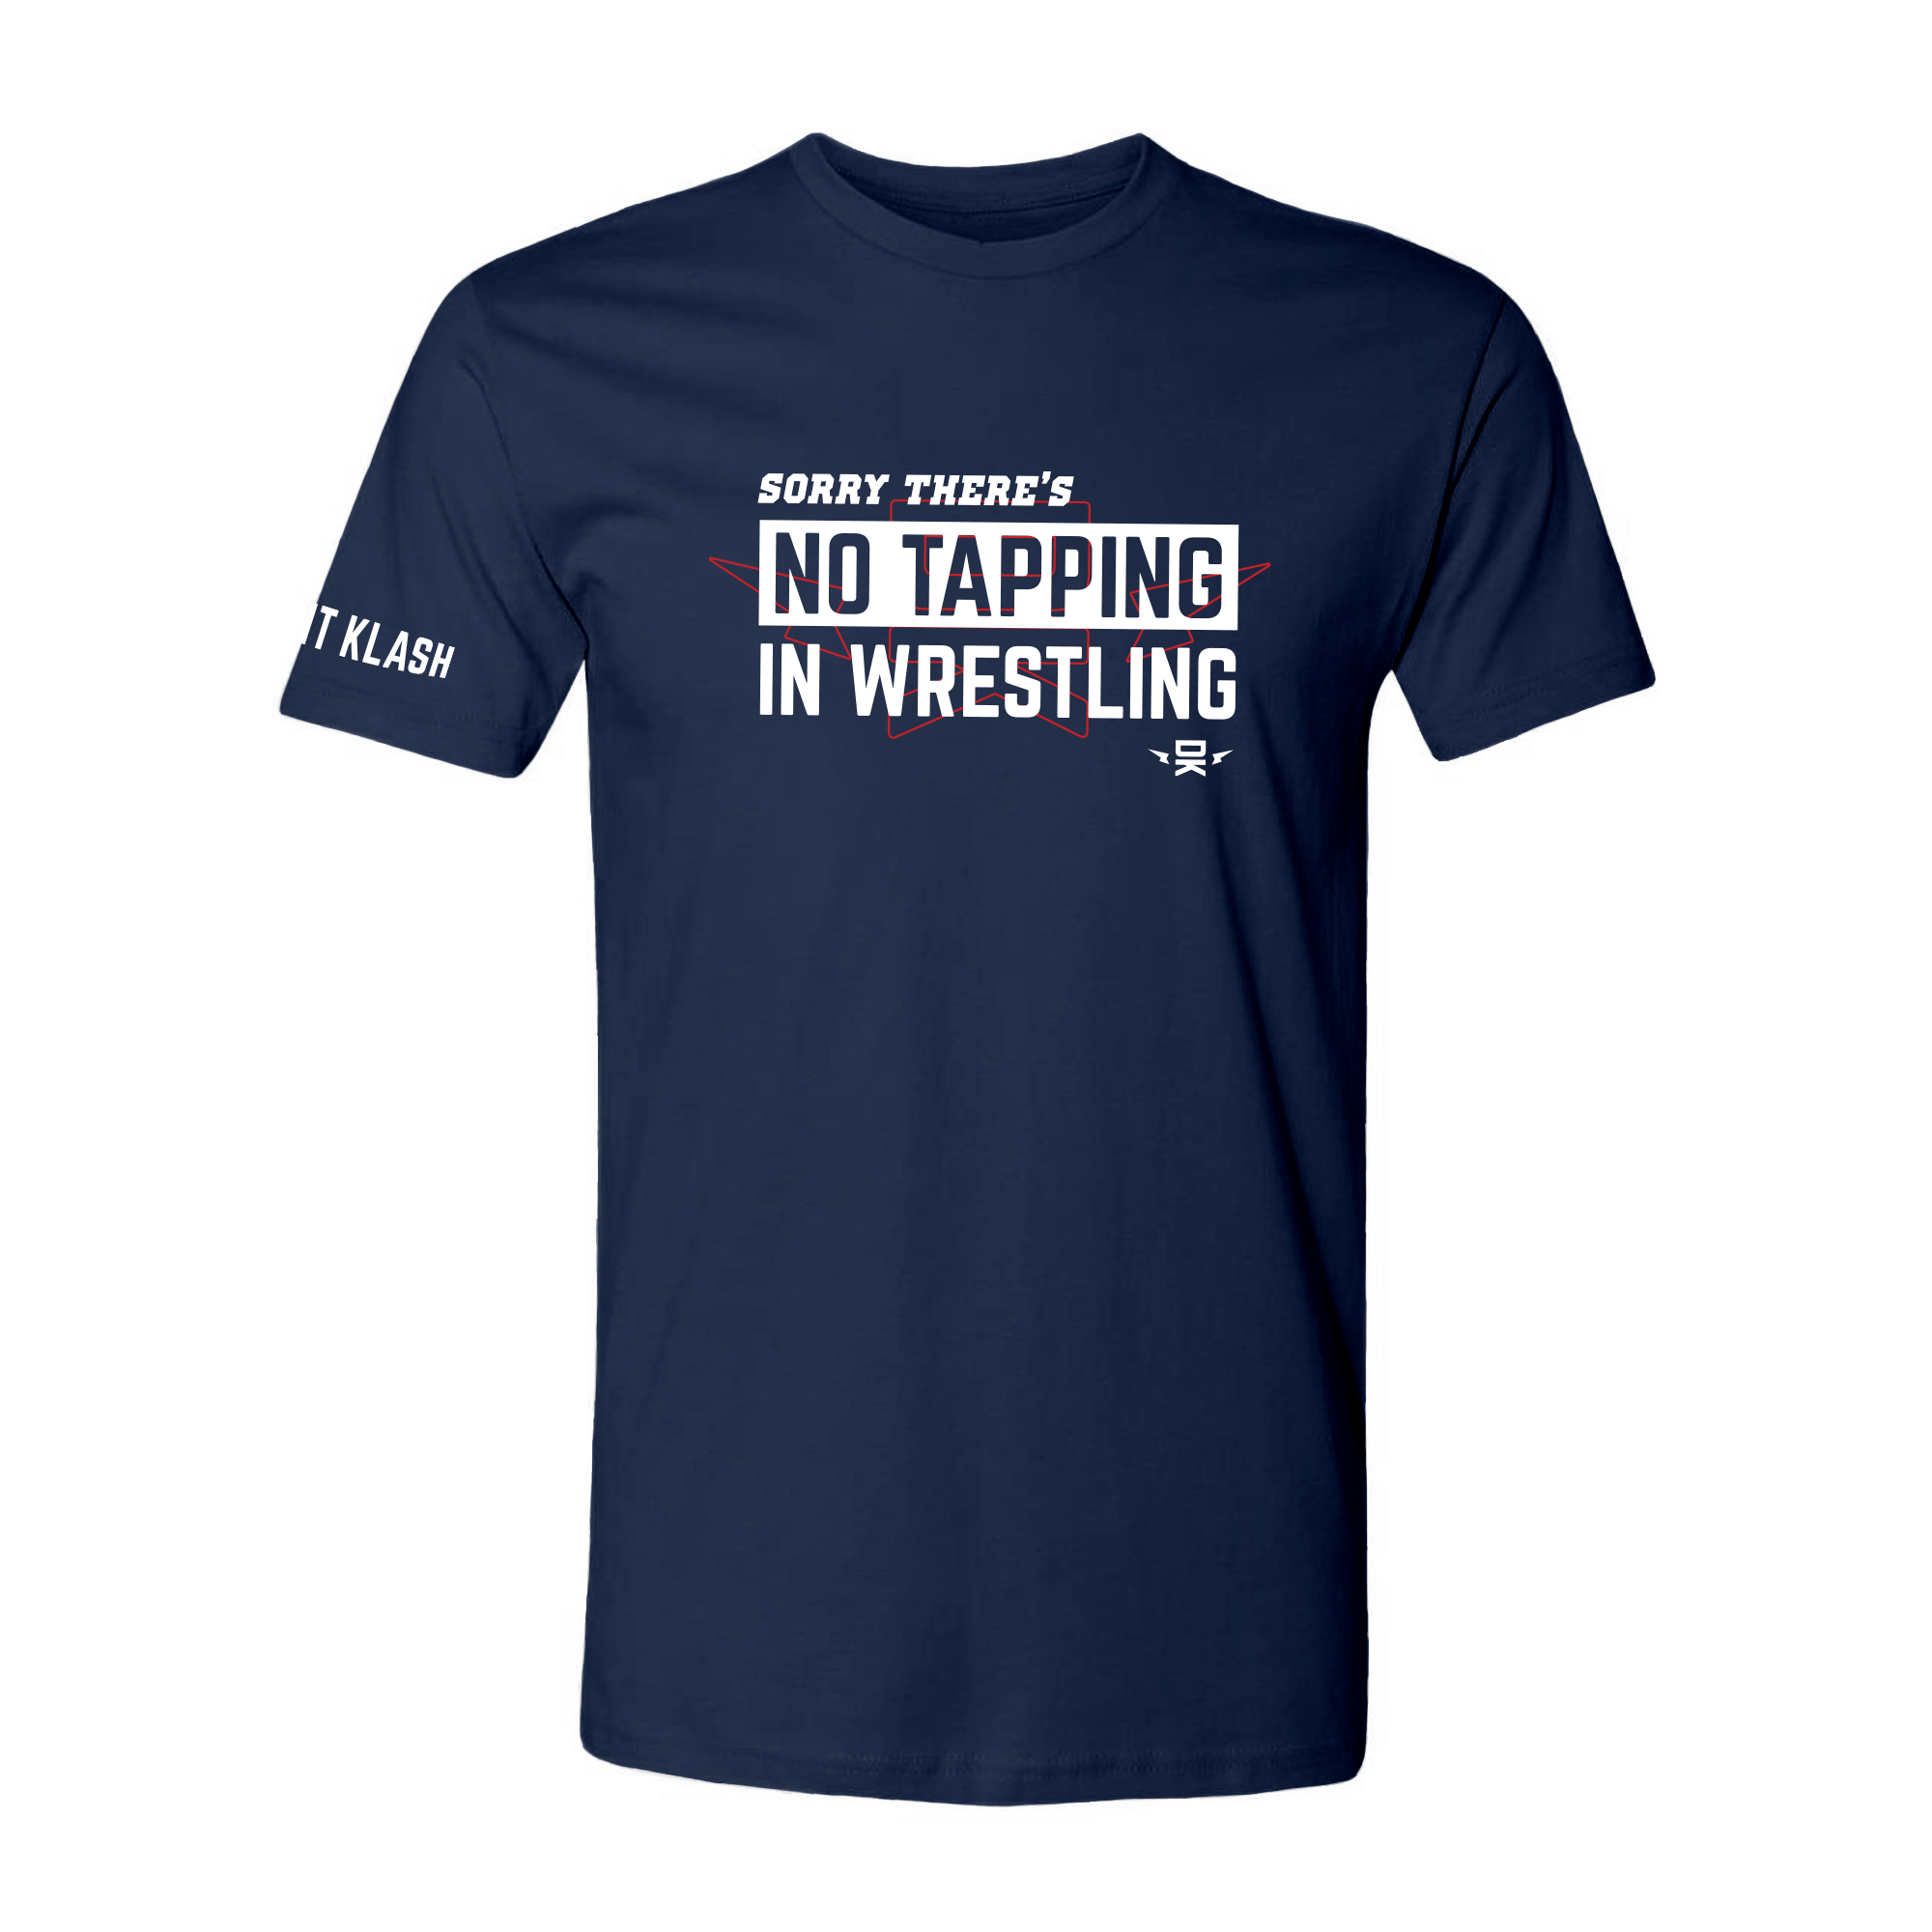 No Tapping in Wrestling YOUTH T-Shirt - Navy, Black